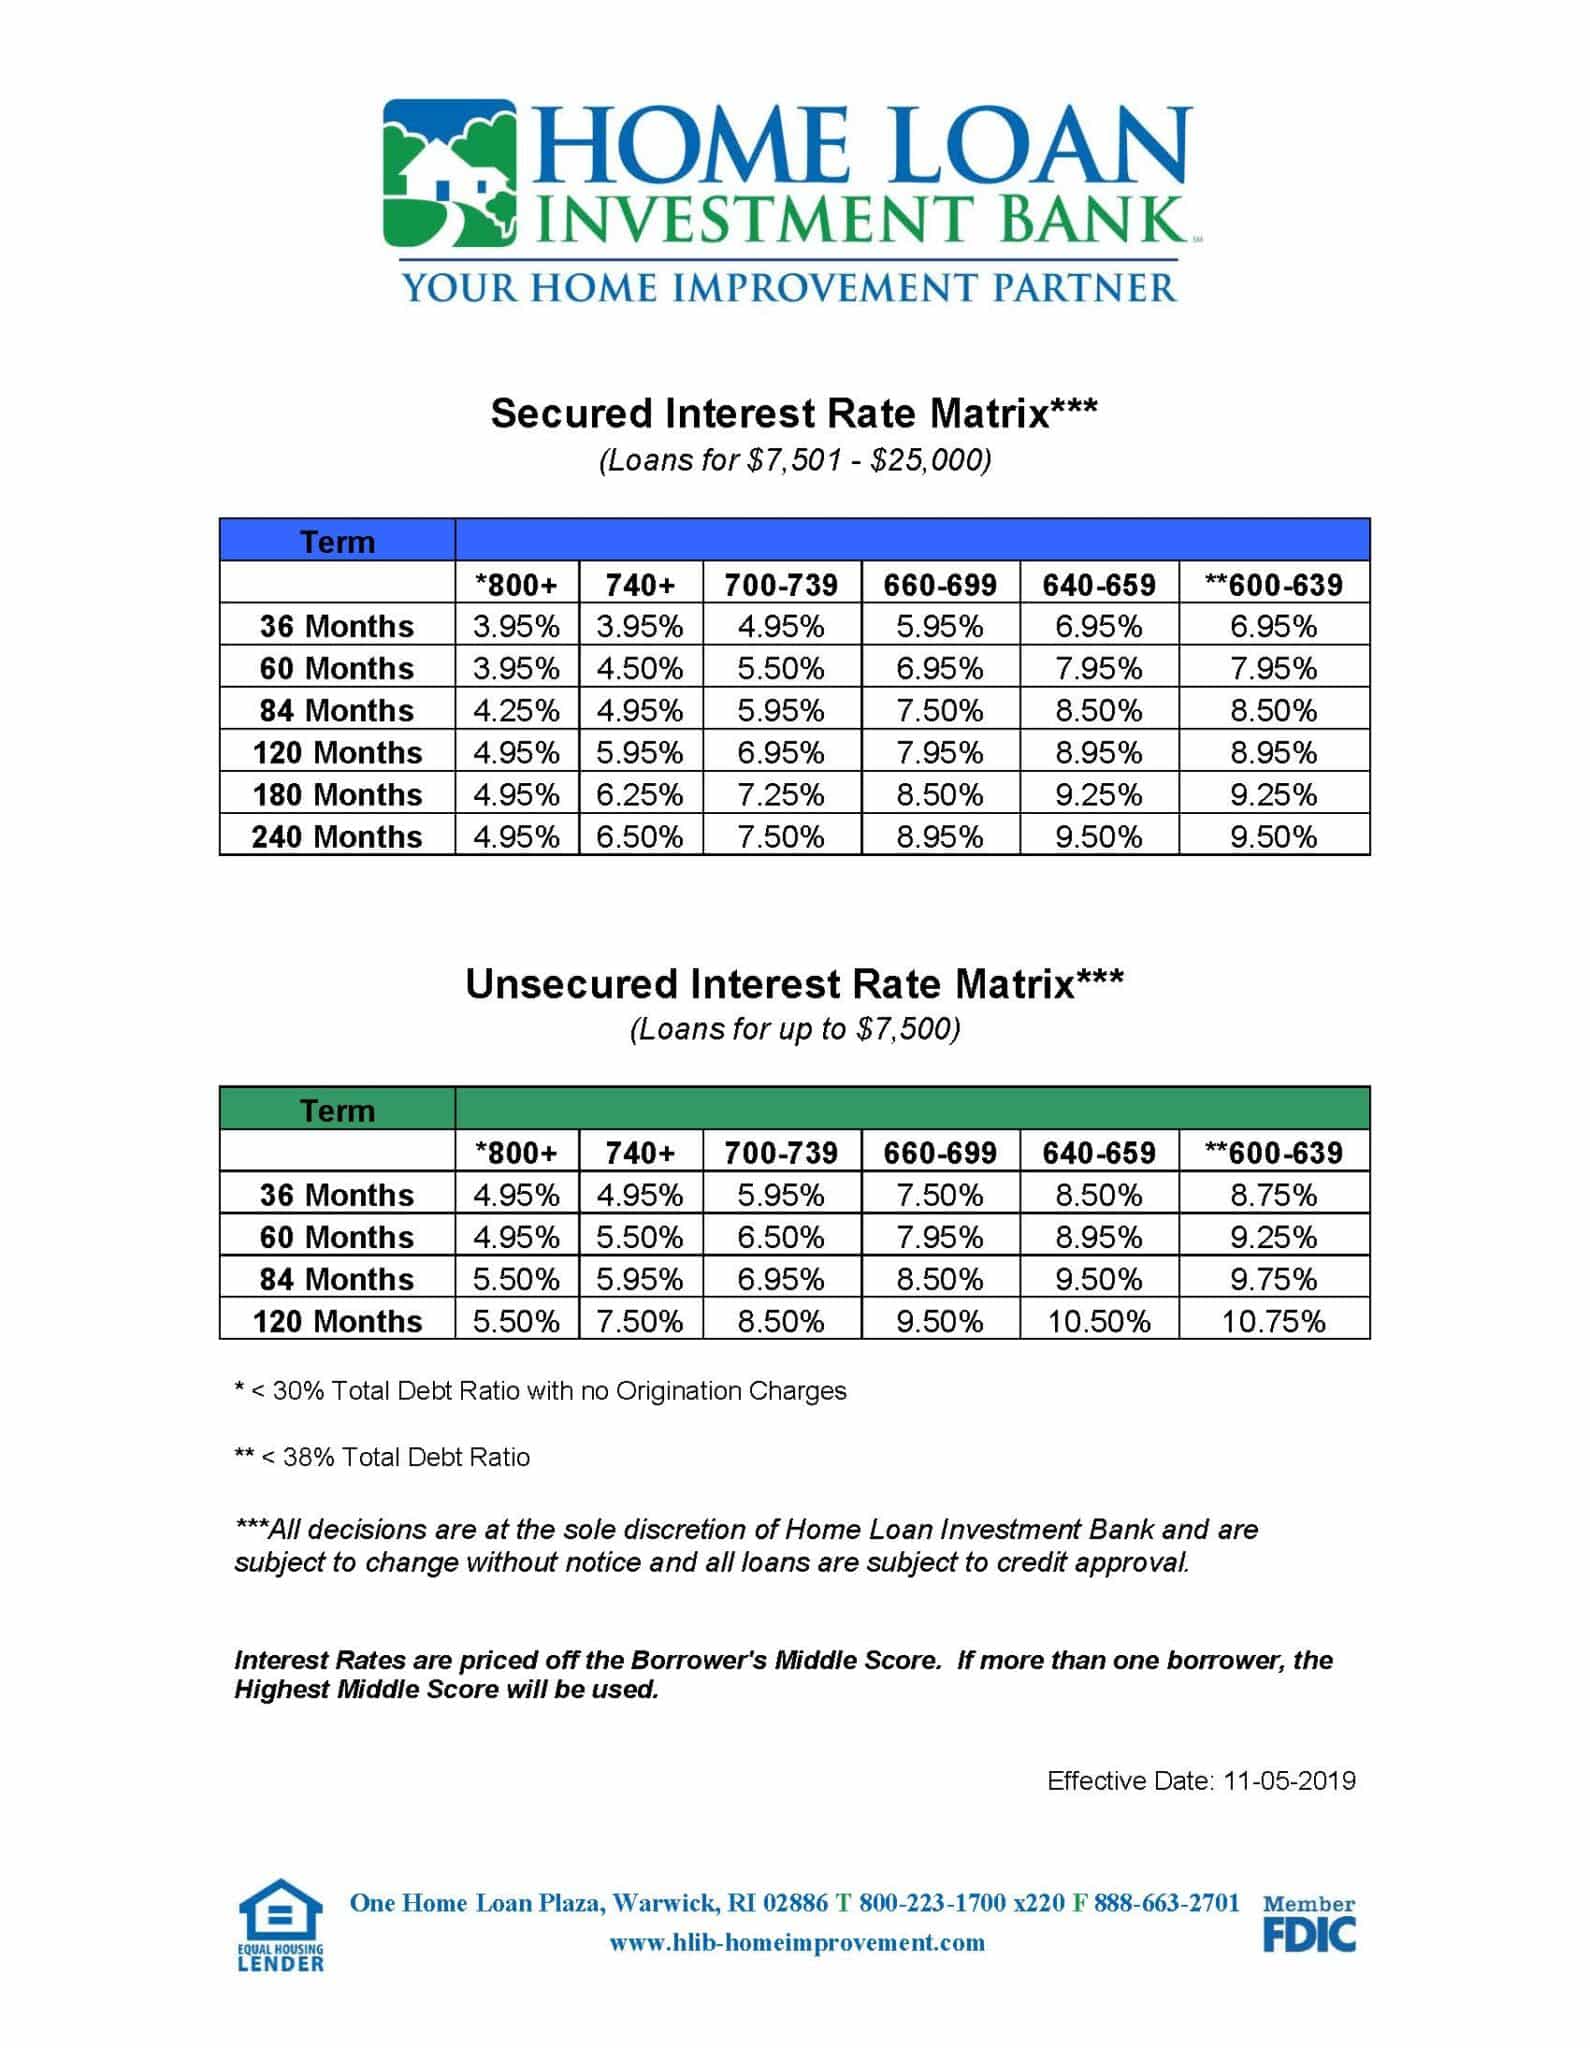 Home Loan Bank Interest Rates